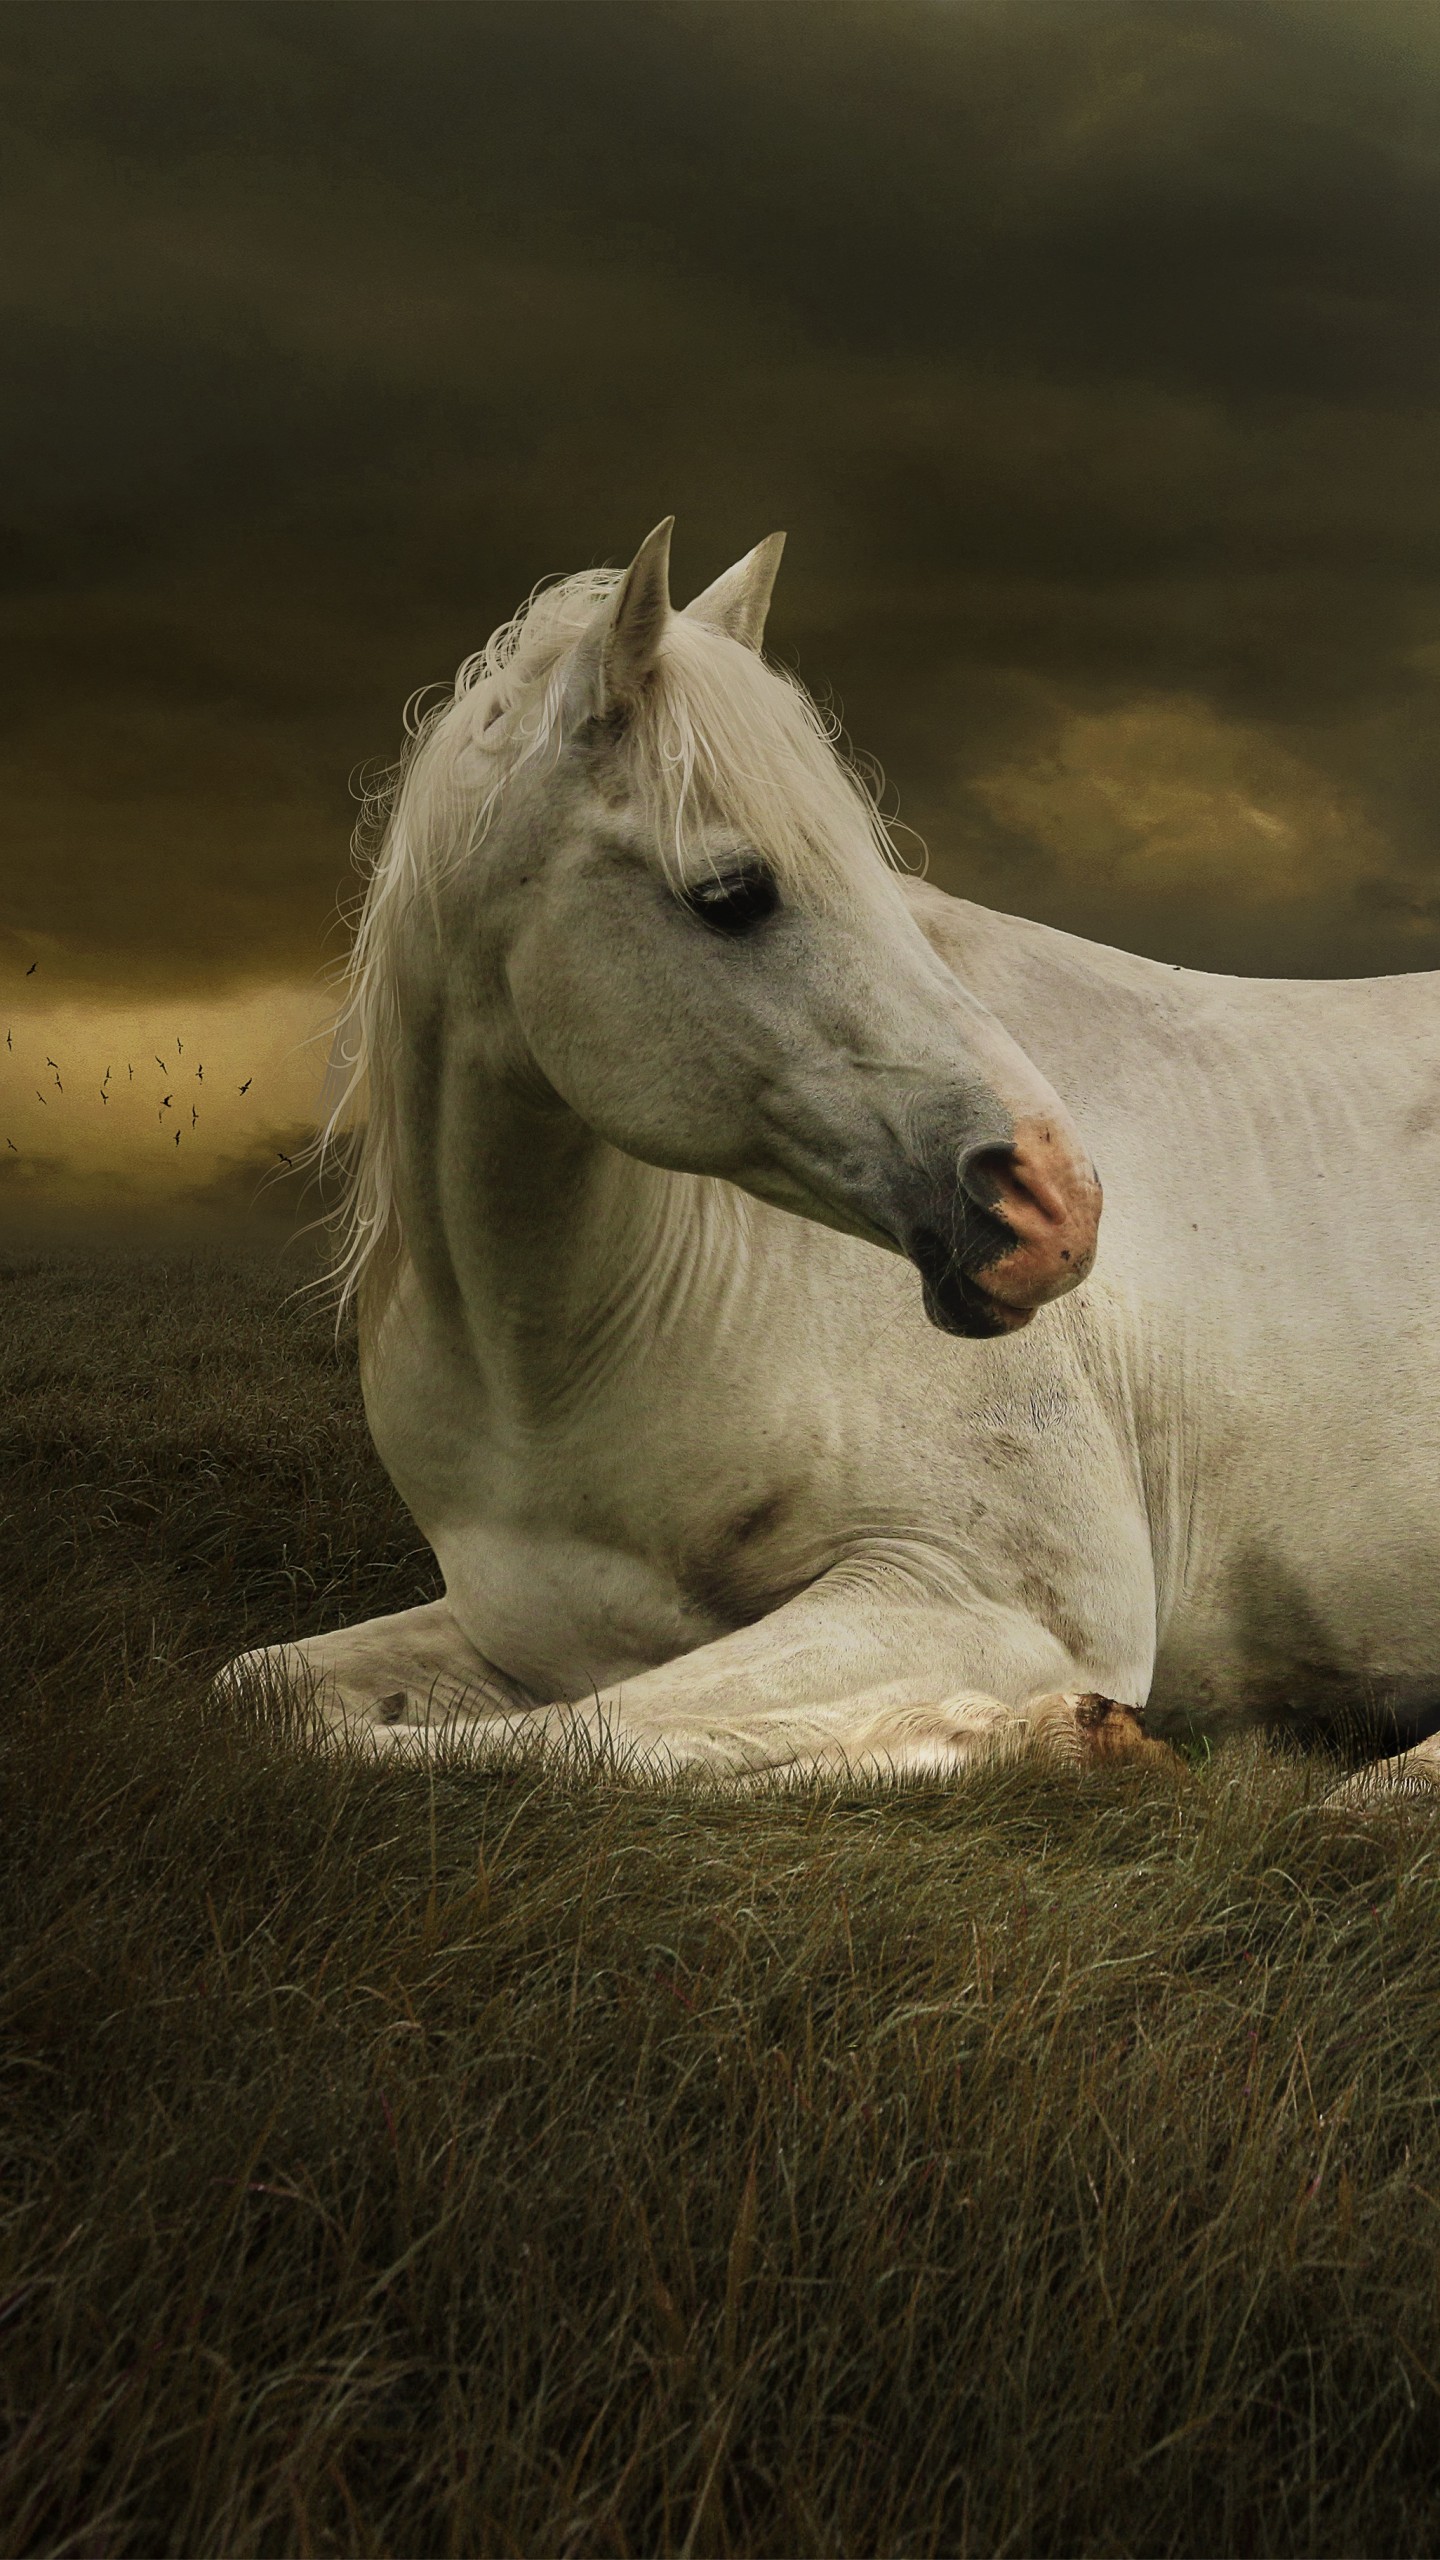 Girl With White Horse - HD Wallpaper 